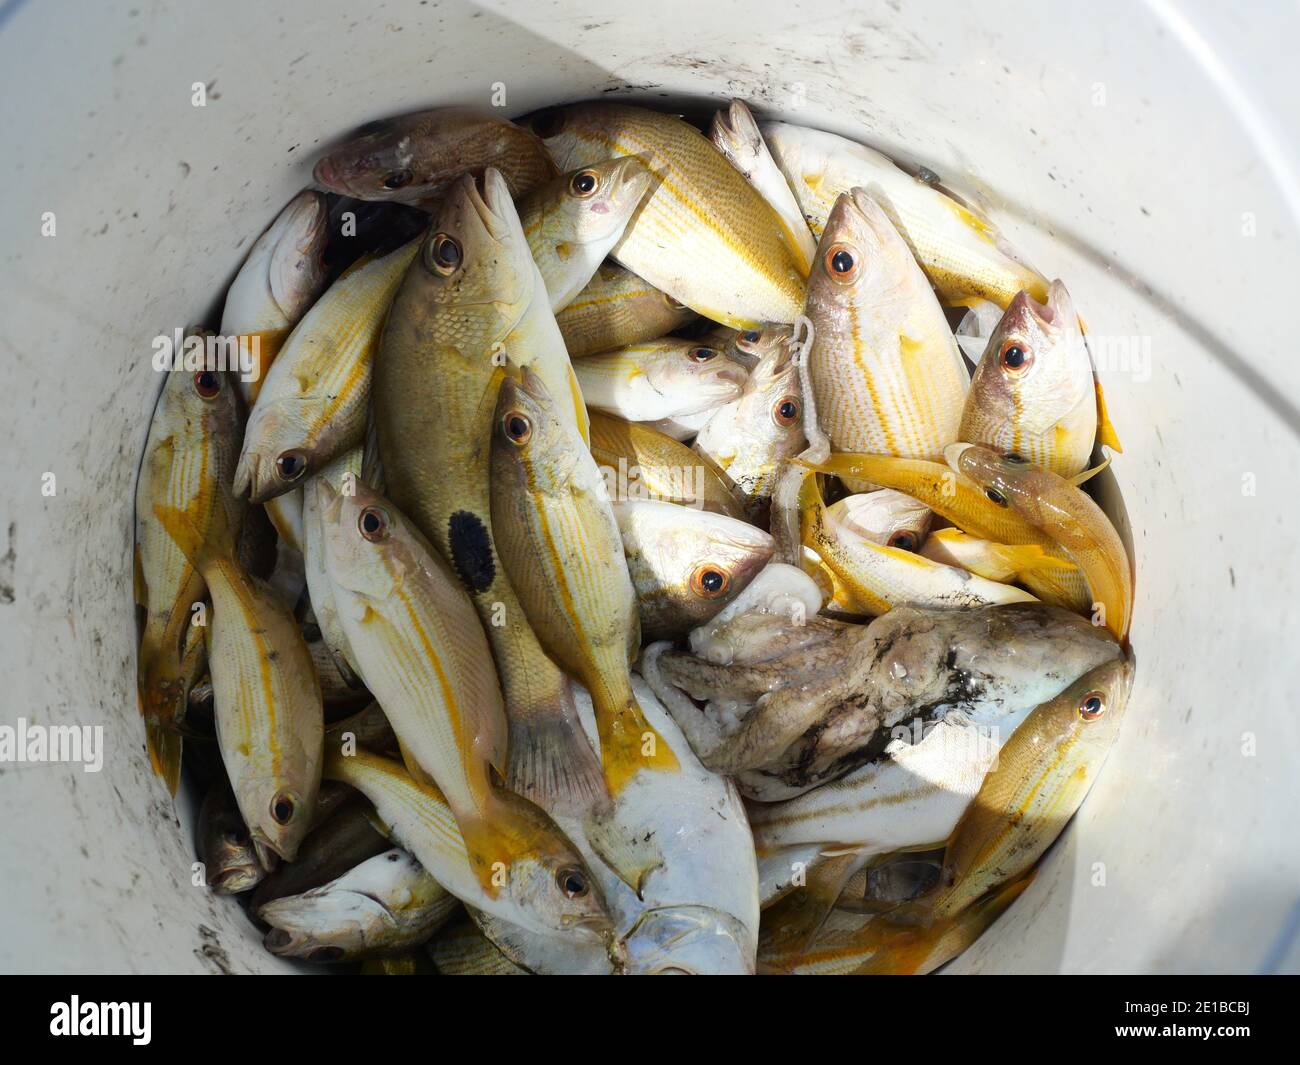 Bigeye snapper fishes in white container, Sea fish with octopus in Thailand Stock Photo